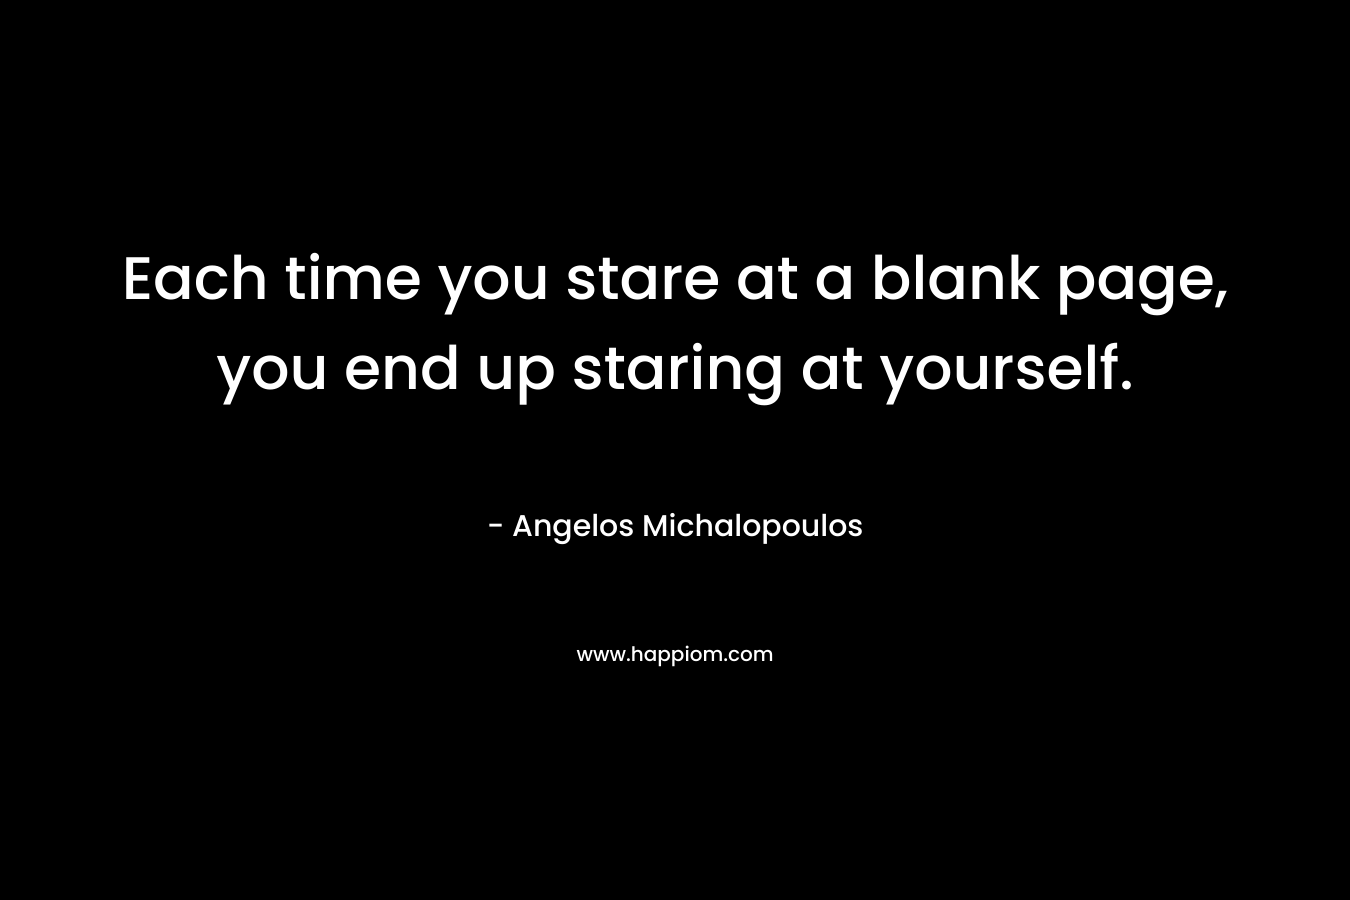 Each time you stare at a blank page, you end up staring at yourself.